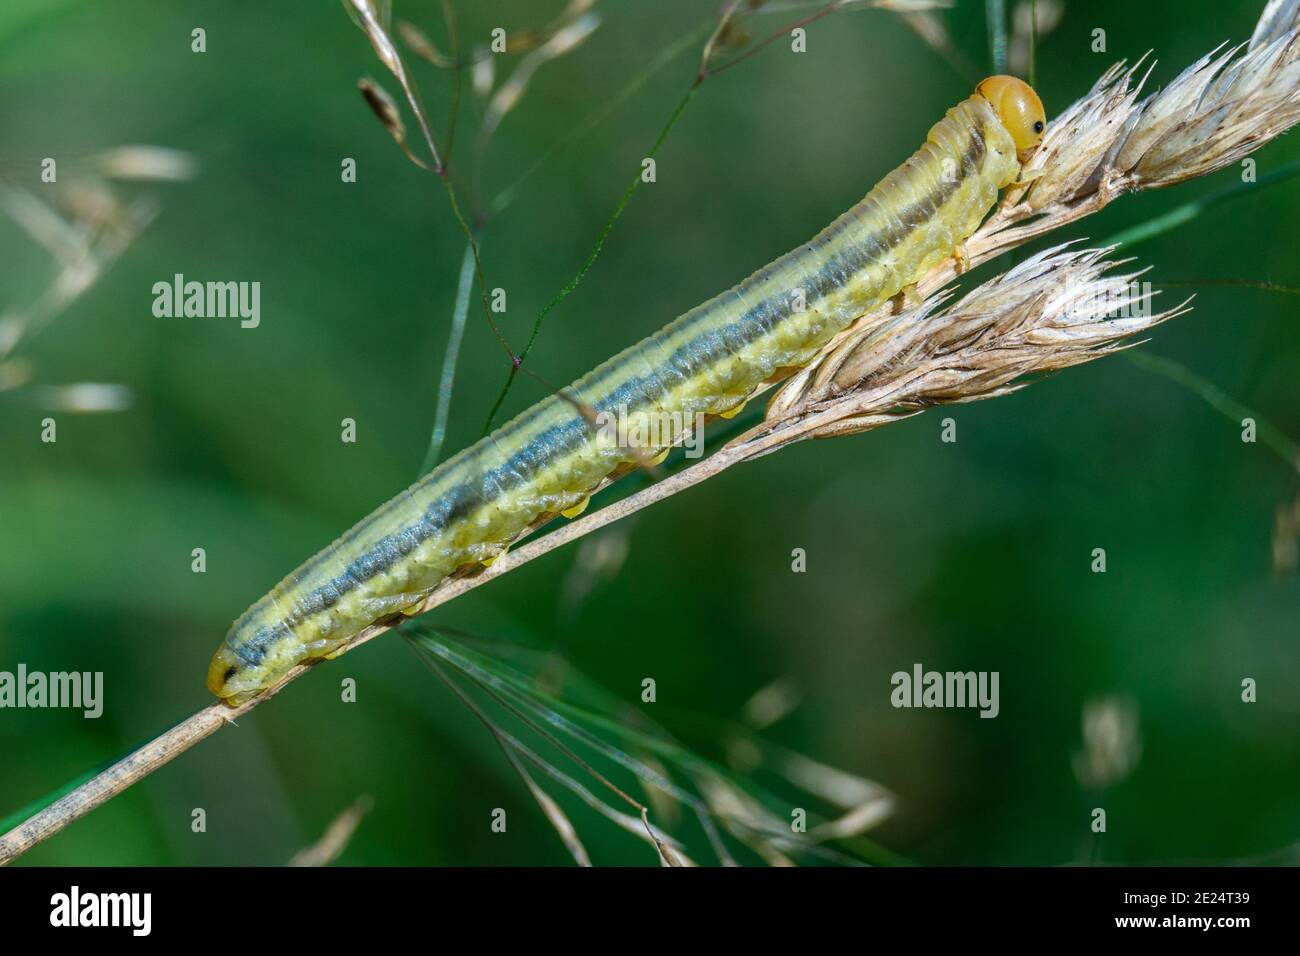 Closeup shot of a caterpillar on a rye stalk against a green background Stock Photo